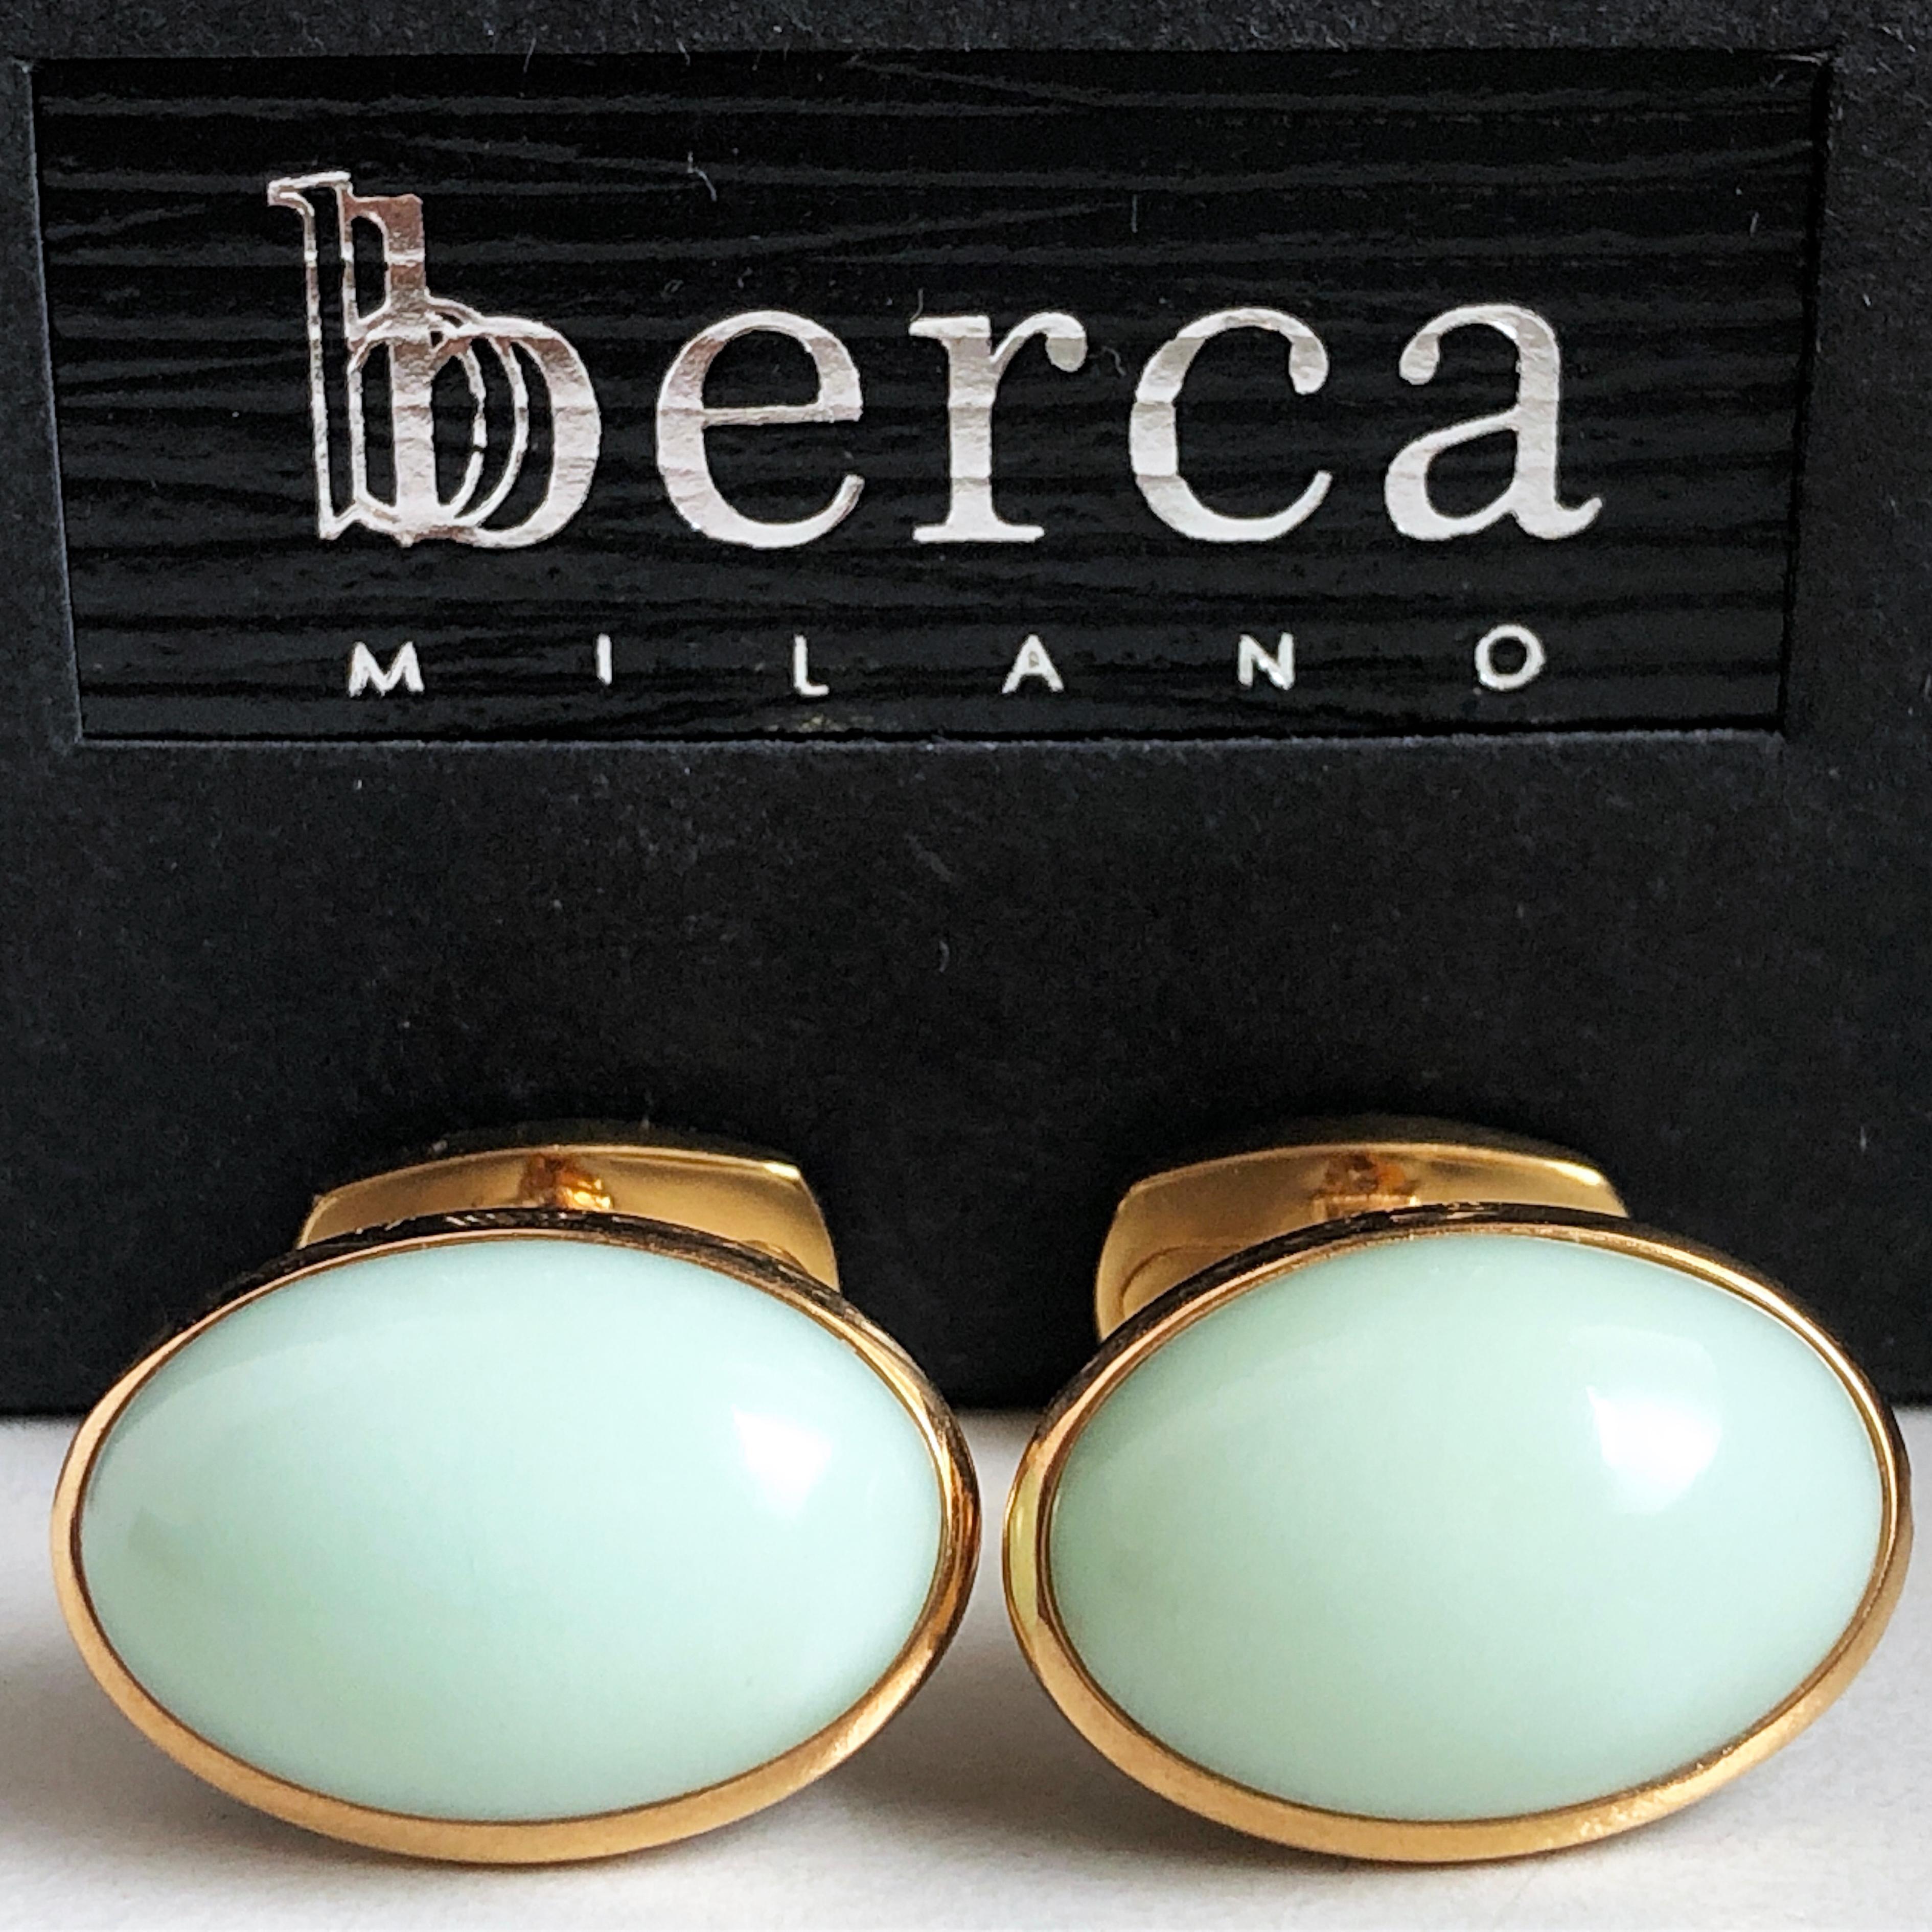 Unique and Chic Natural Pale Green Opal Oval Cabochon T-Bar Back, Sterling Silver Yellow Gold Plated Cufflinks.
In our smart black box and pouch.
